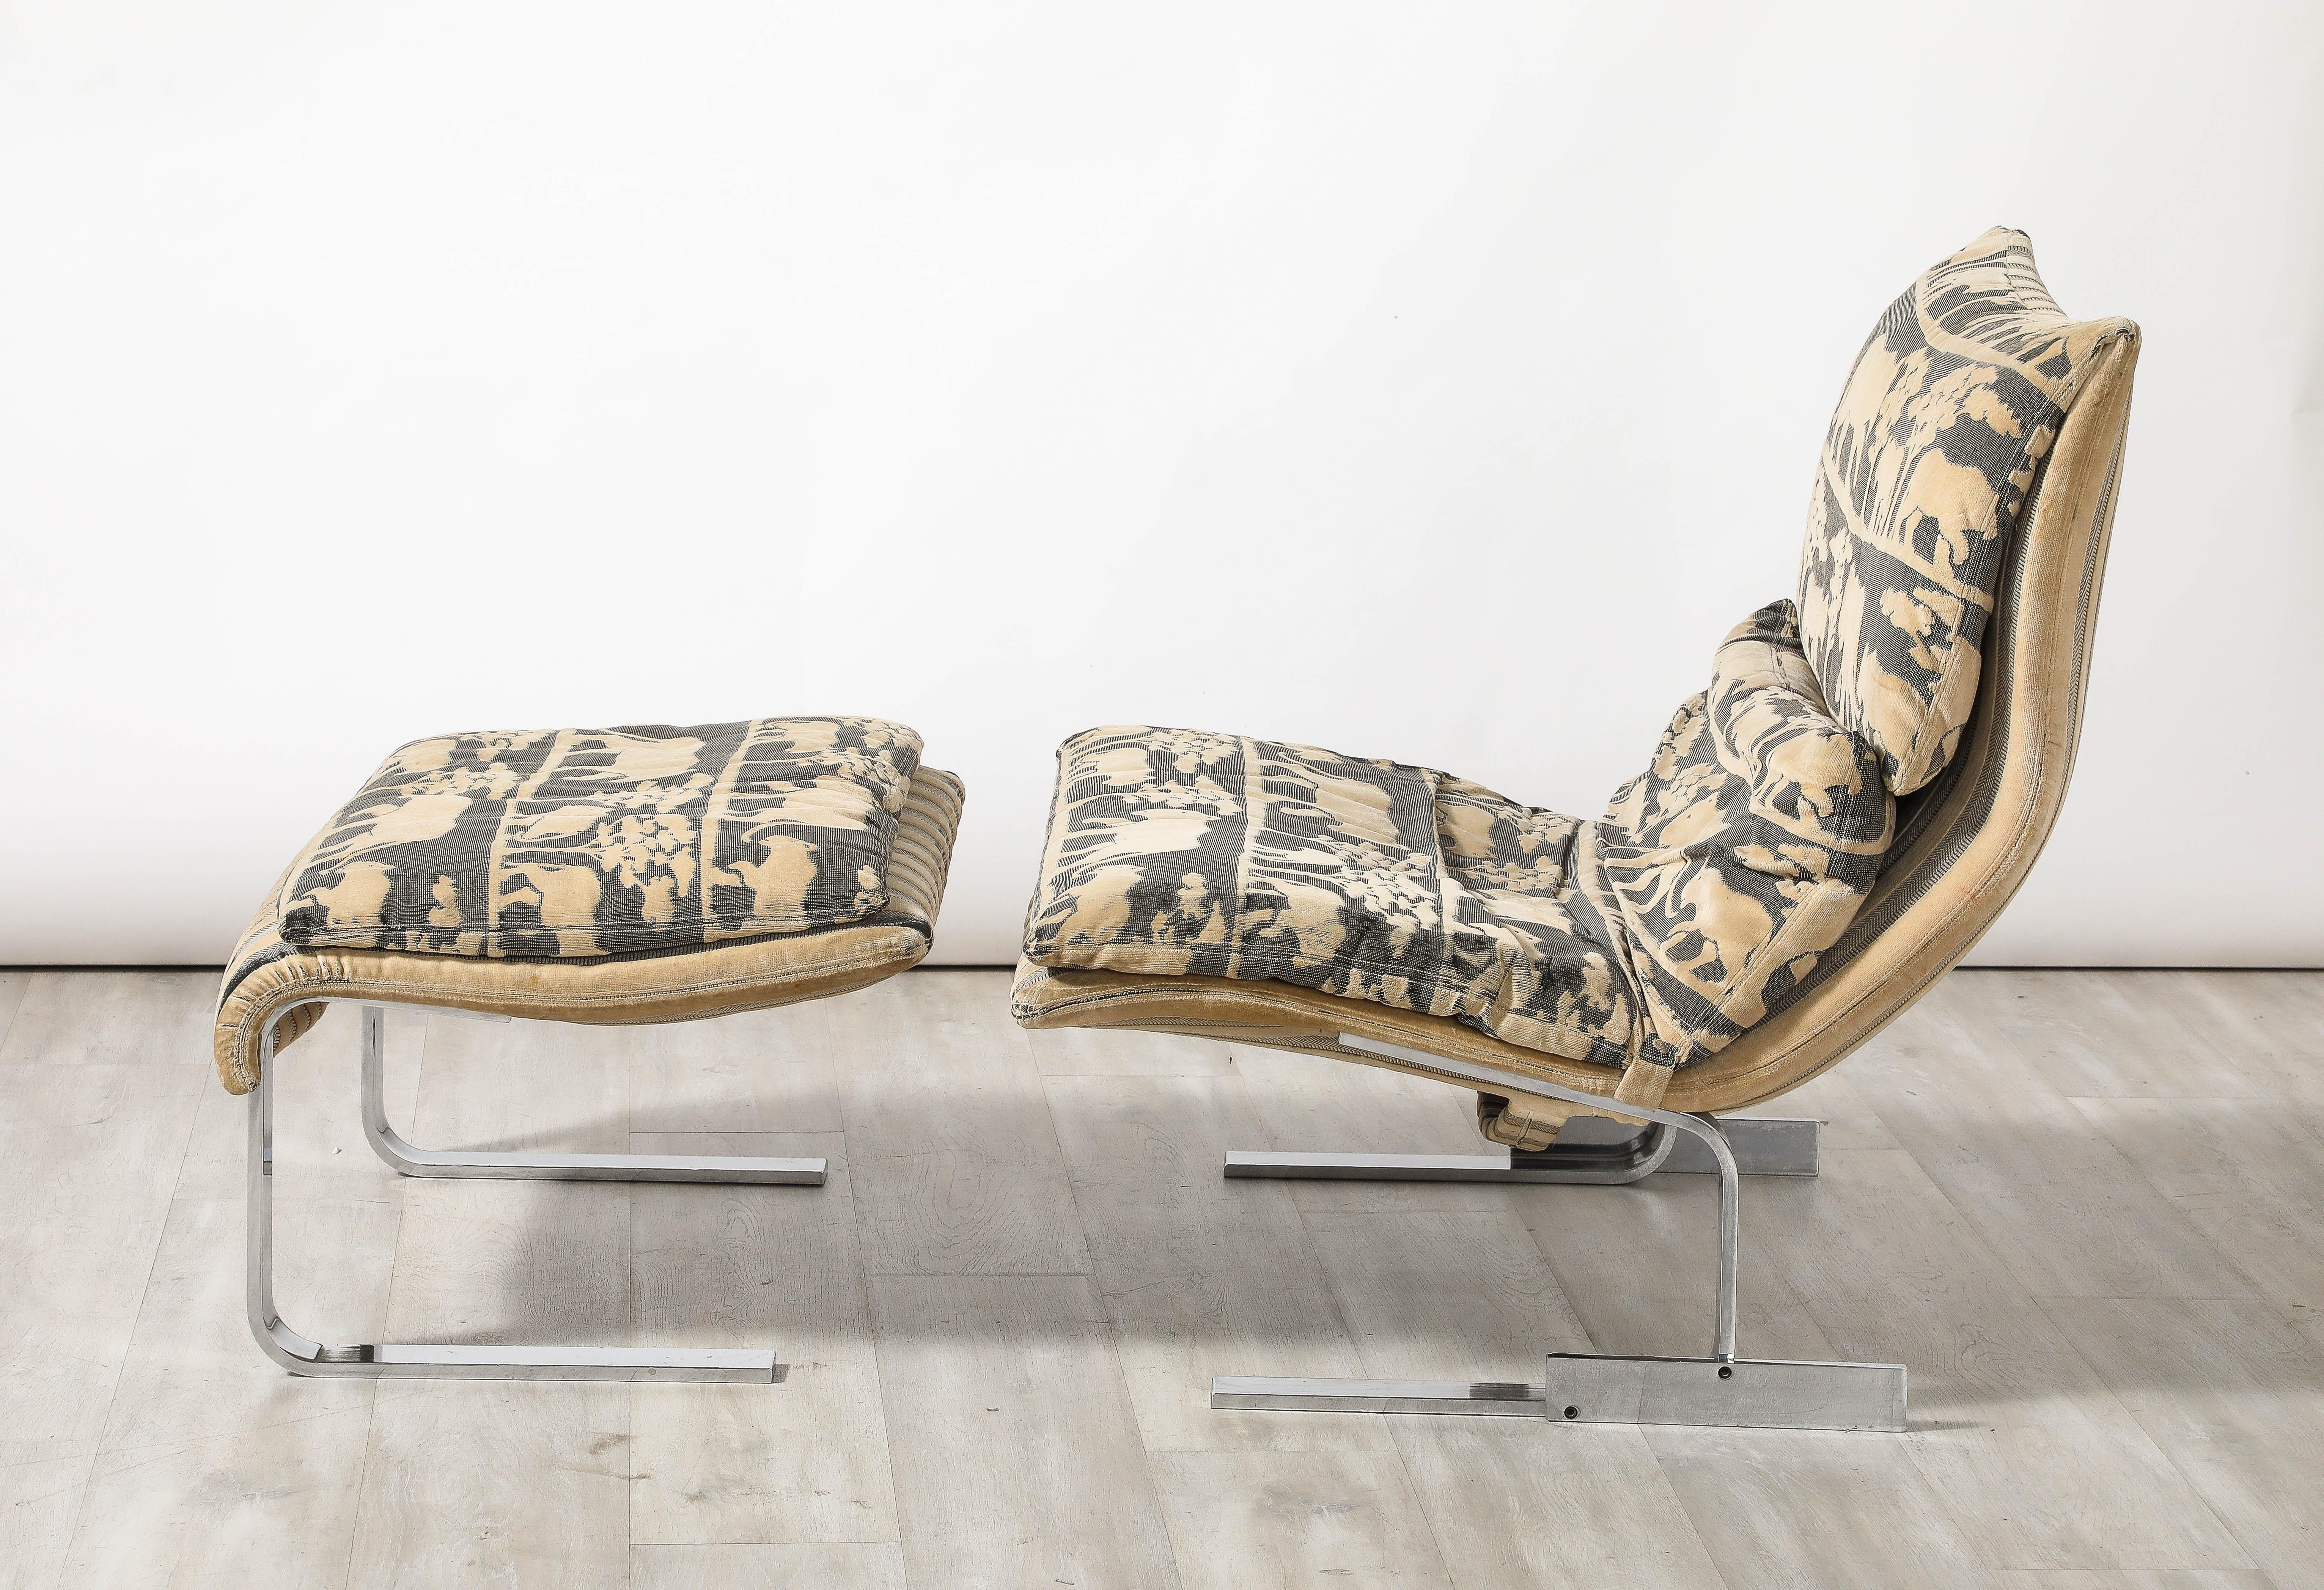 Stainless Steel Giovanni Offredi 'Onda' Lounge Chair and Ottoman for Saporiti, Italy, circa 1970 For Sale